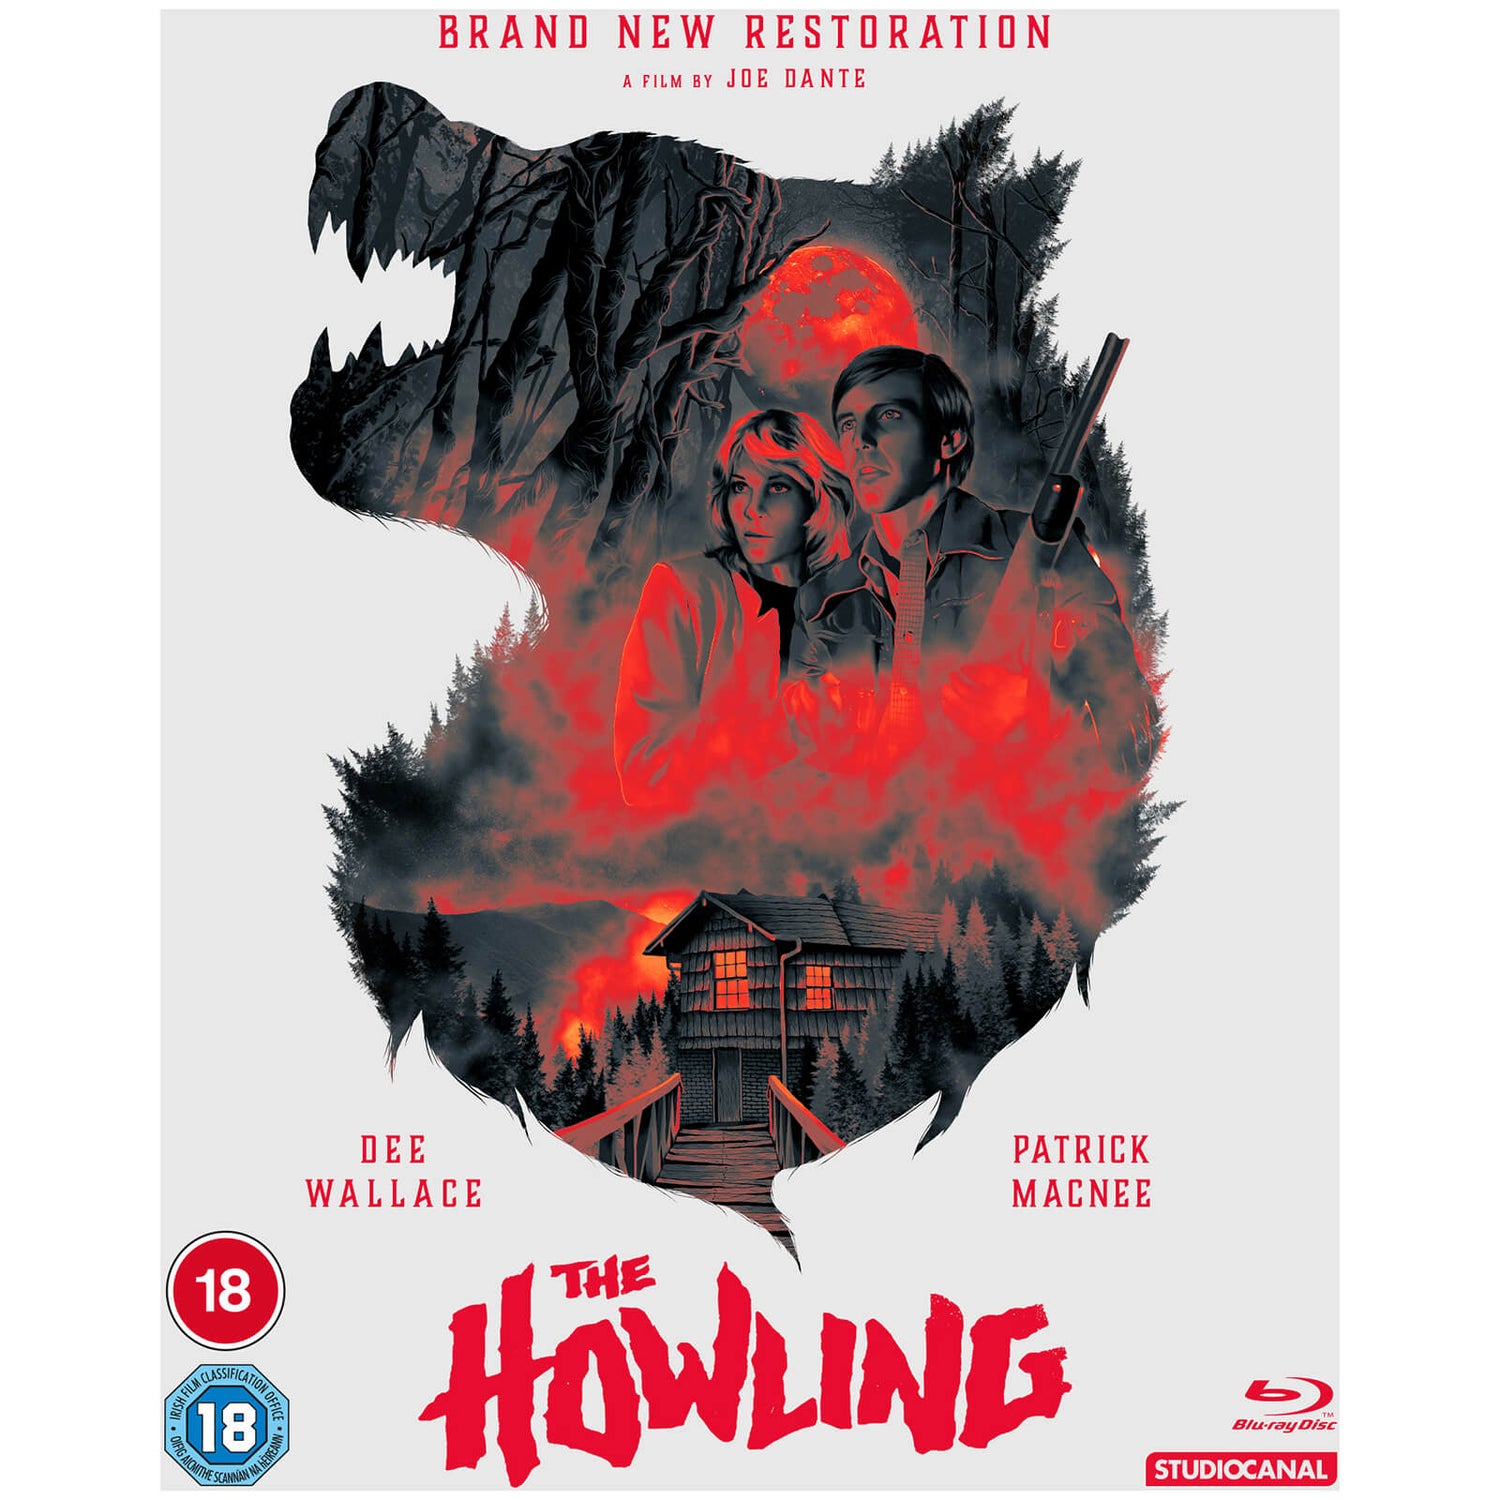 The Howling - 40th Anniversary Restoration